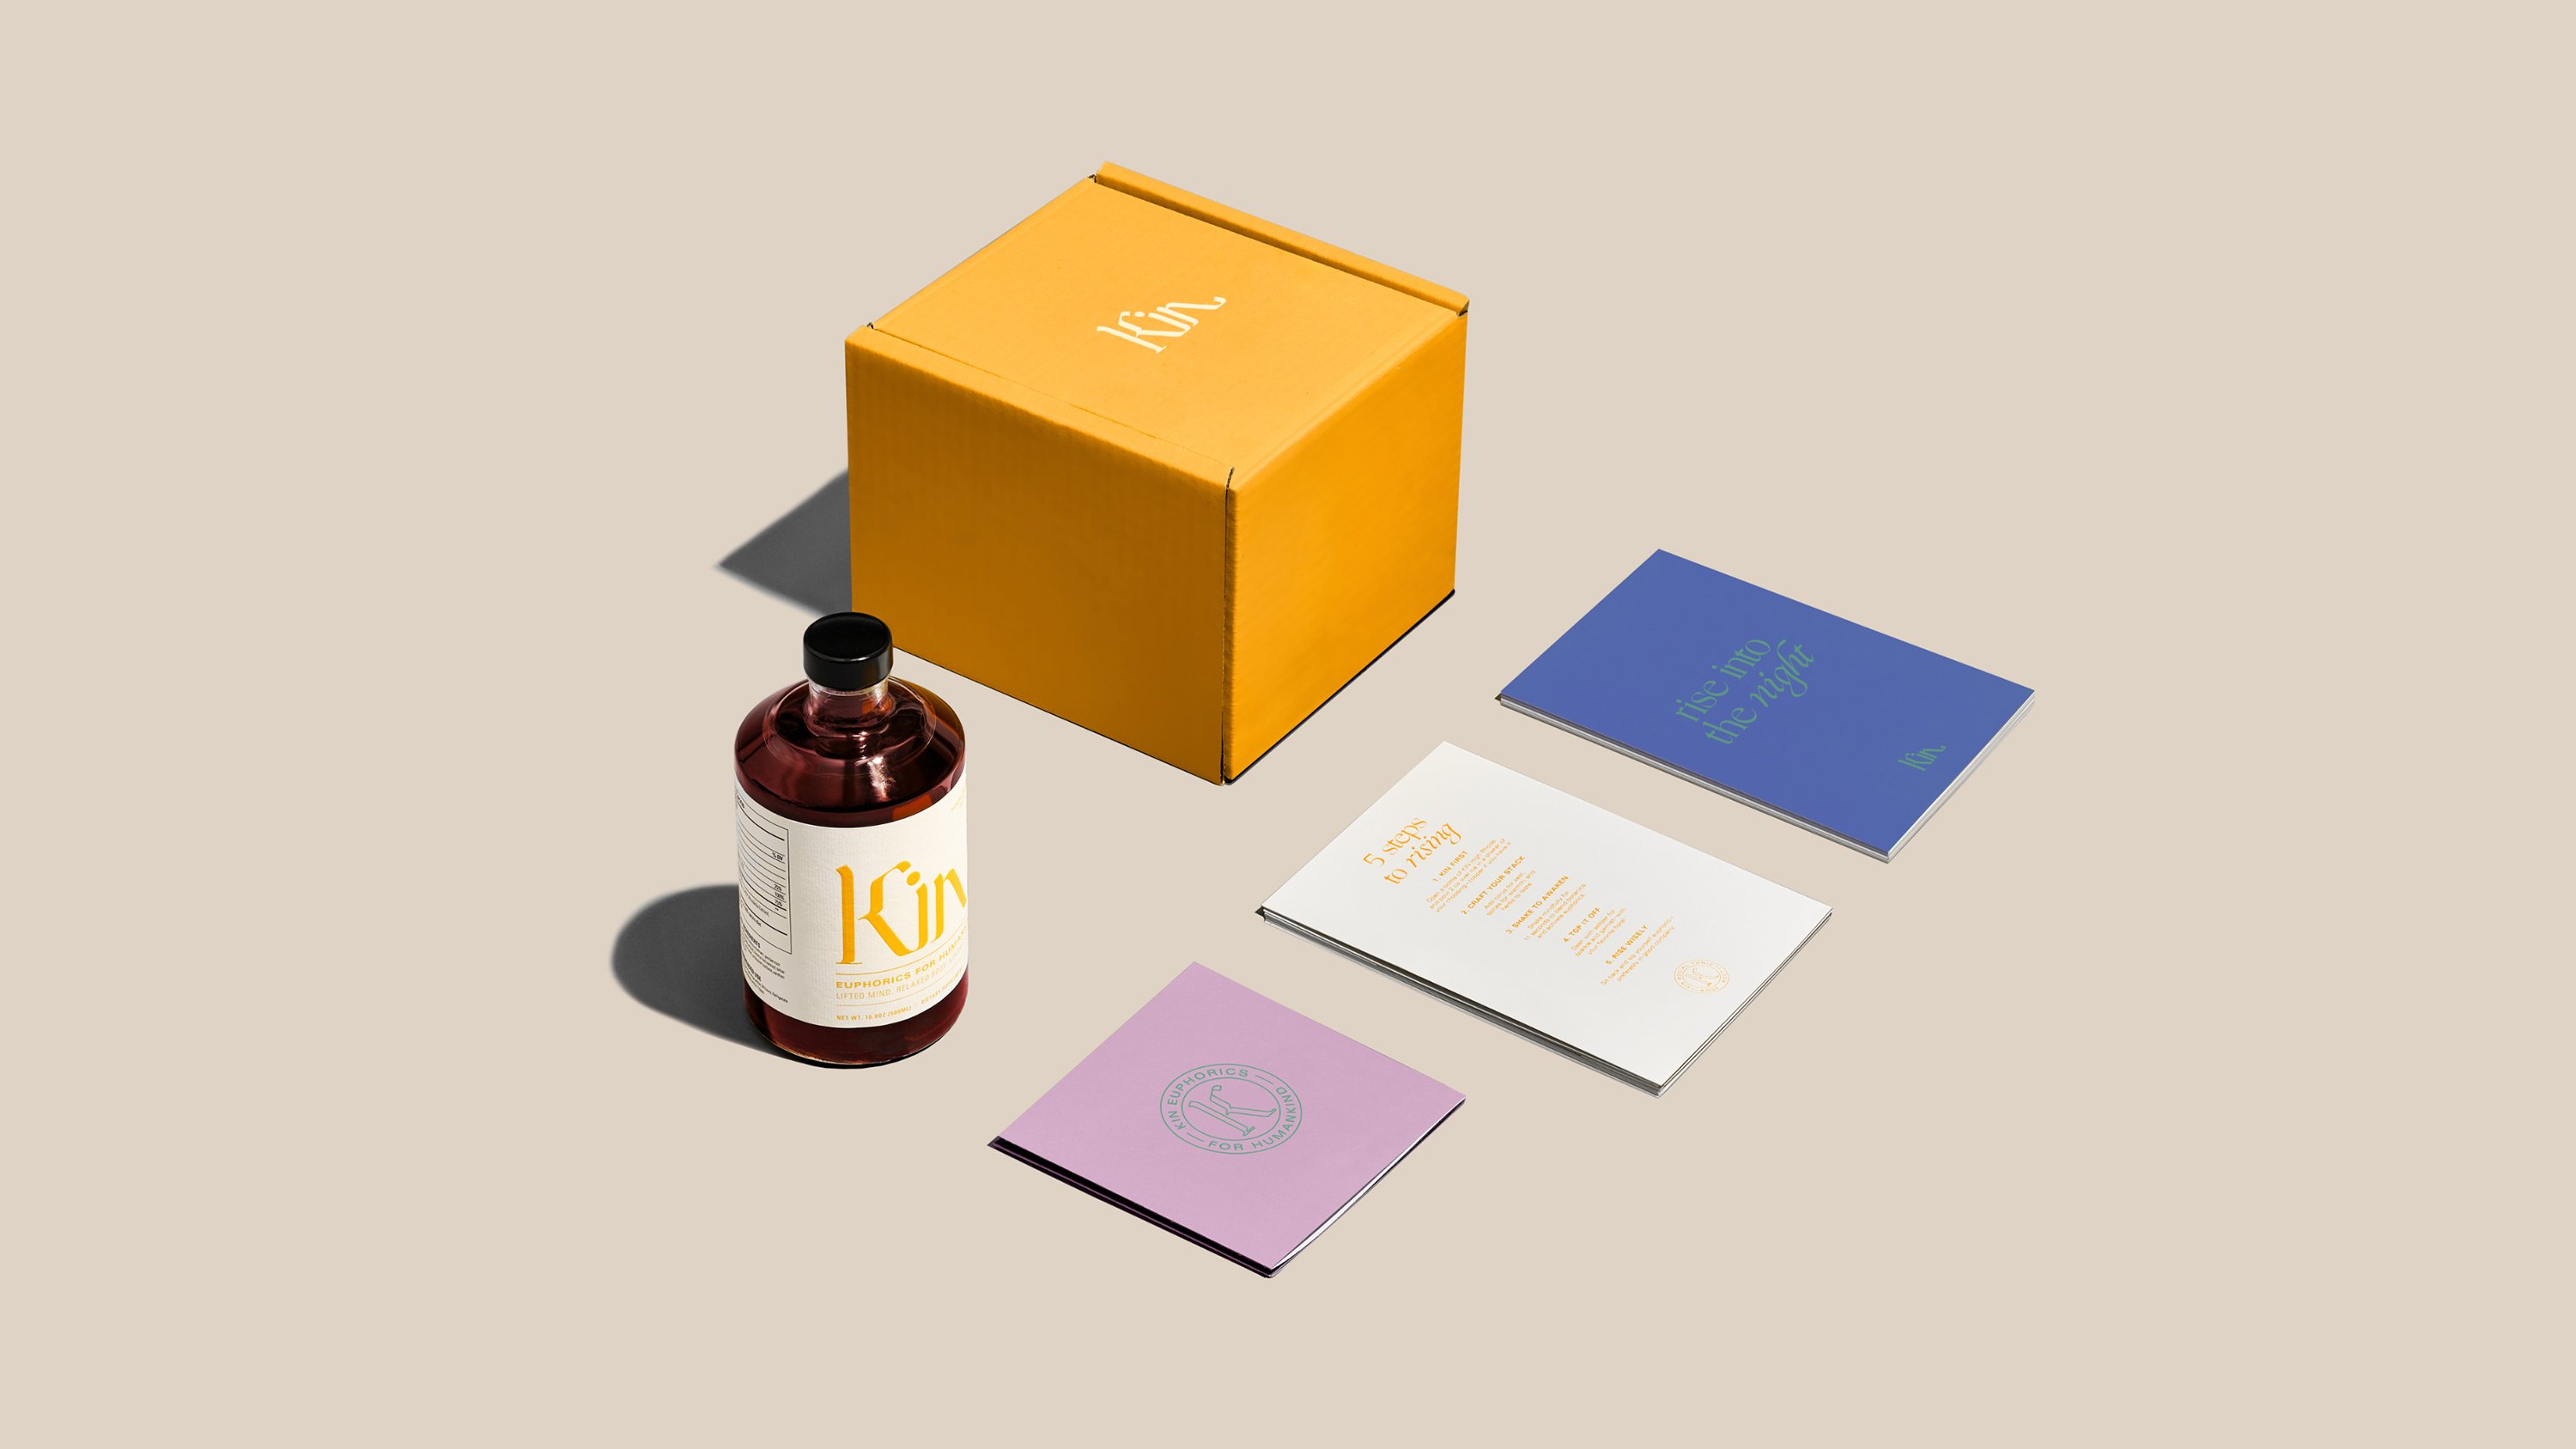 Kin Euphorics branding and packaging suite, in partnership with RoAndCo